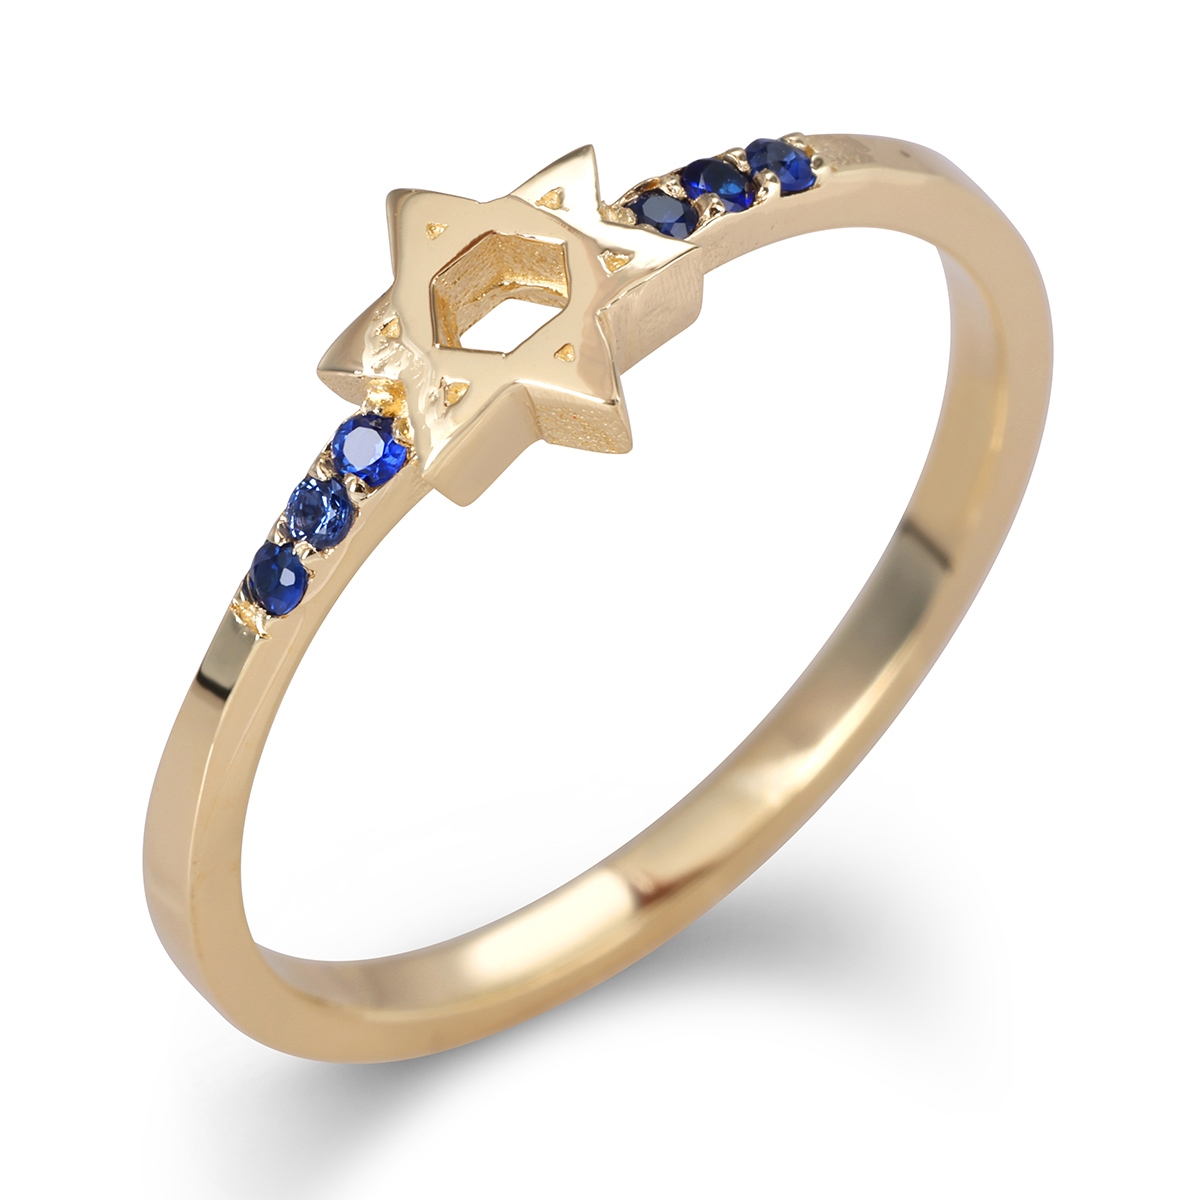 Star of David 14K Yellow Gold Ring With Blue Sapphire Stones - 1